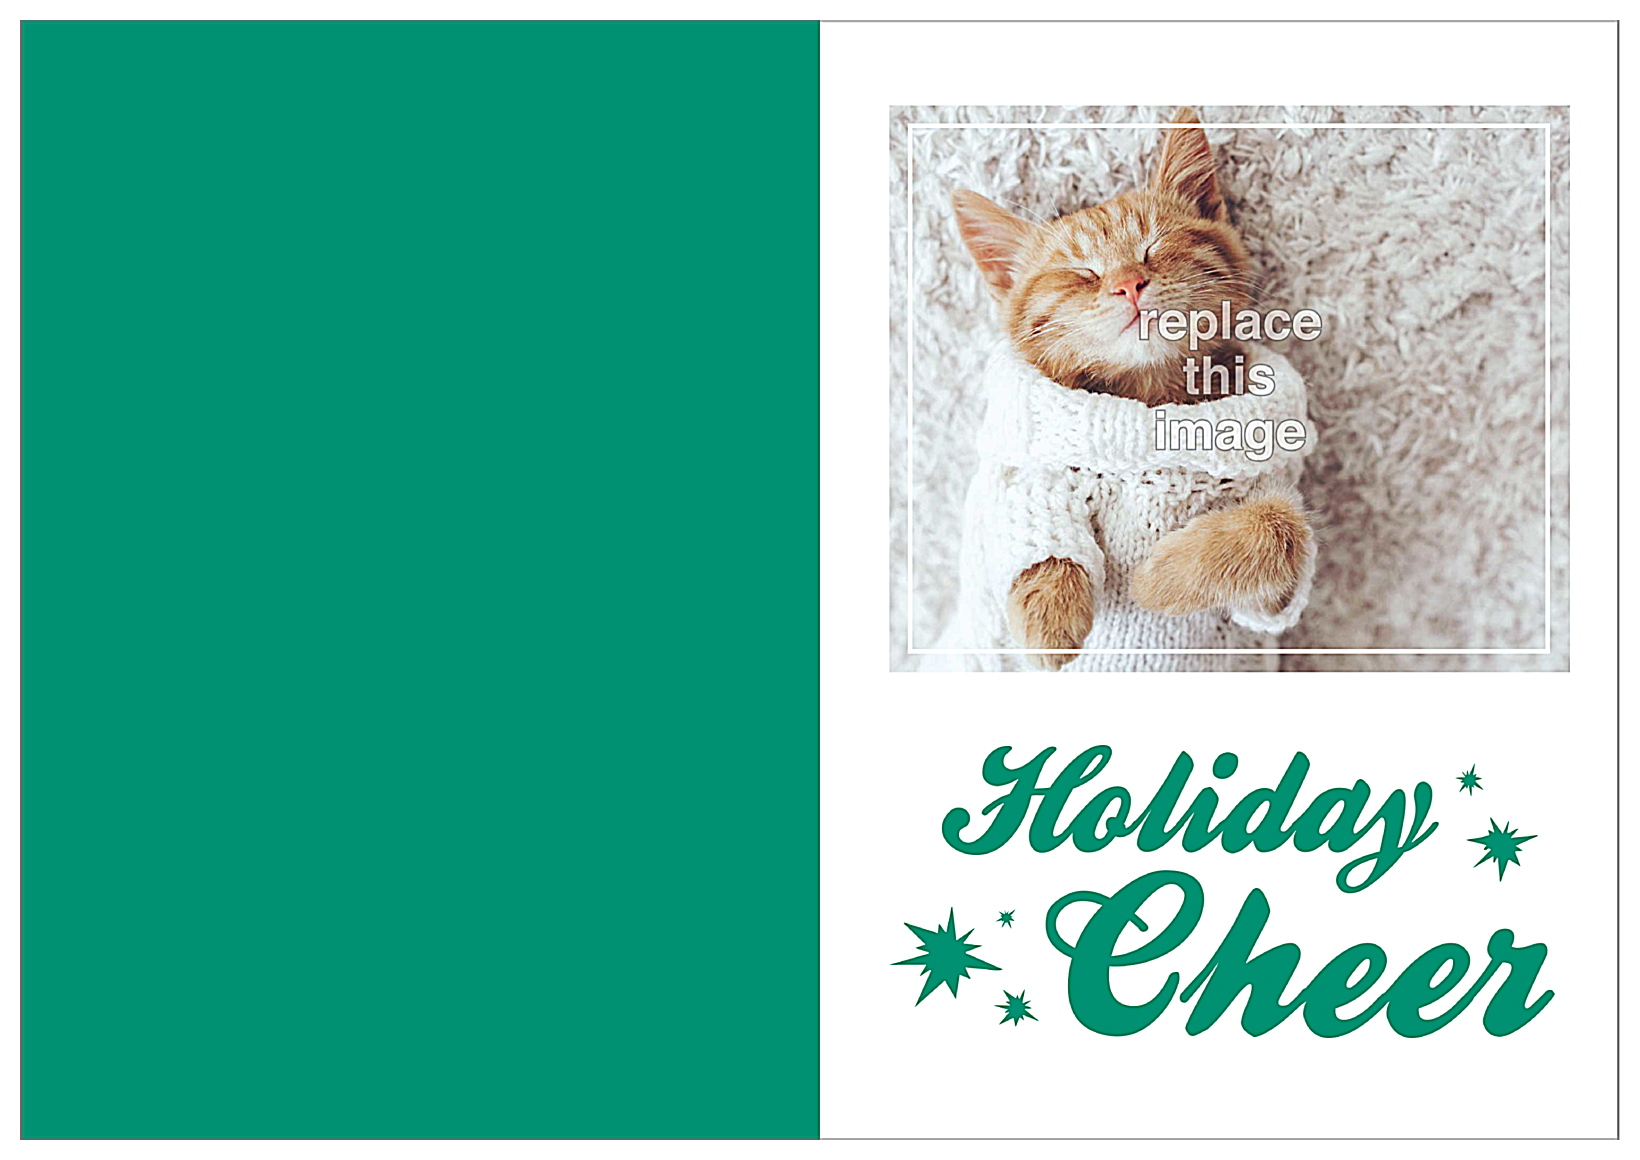 Comfort and Cheer front - Greeting Cards Maker